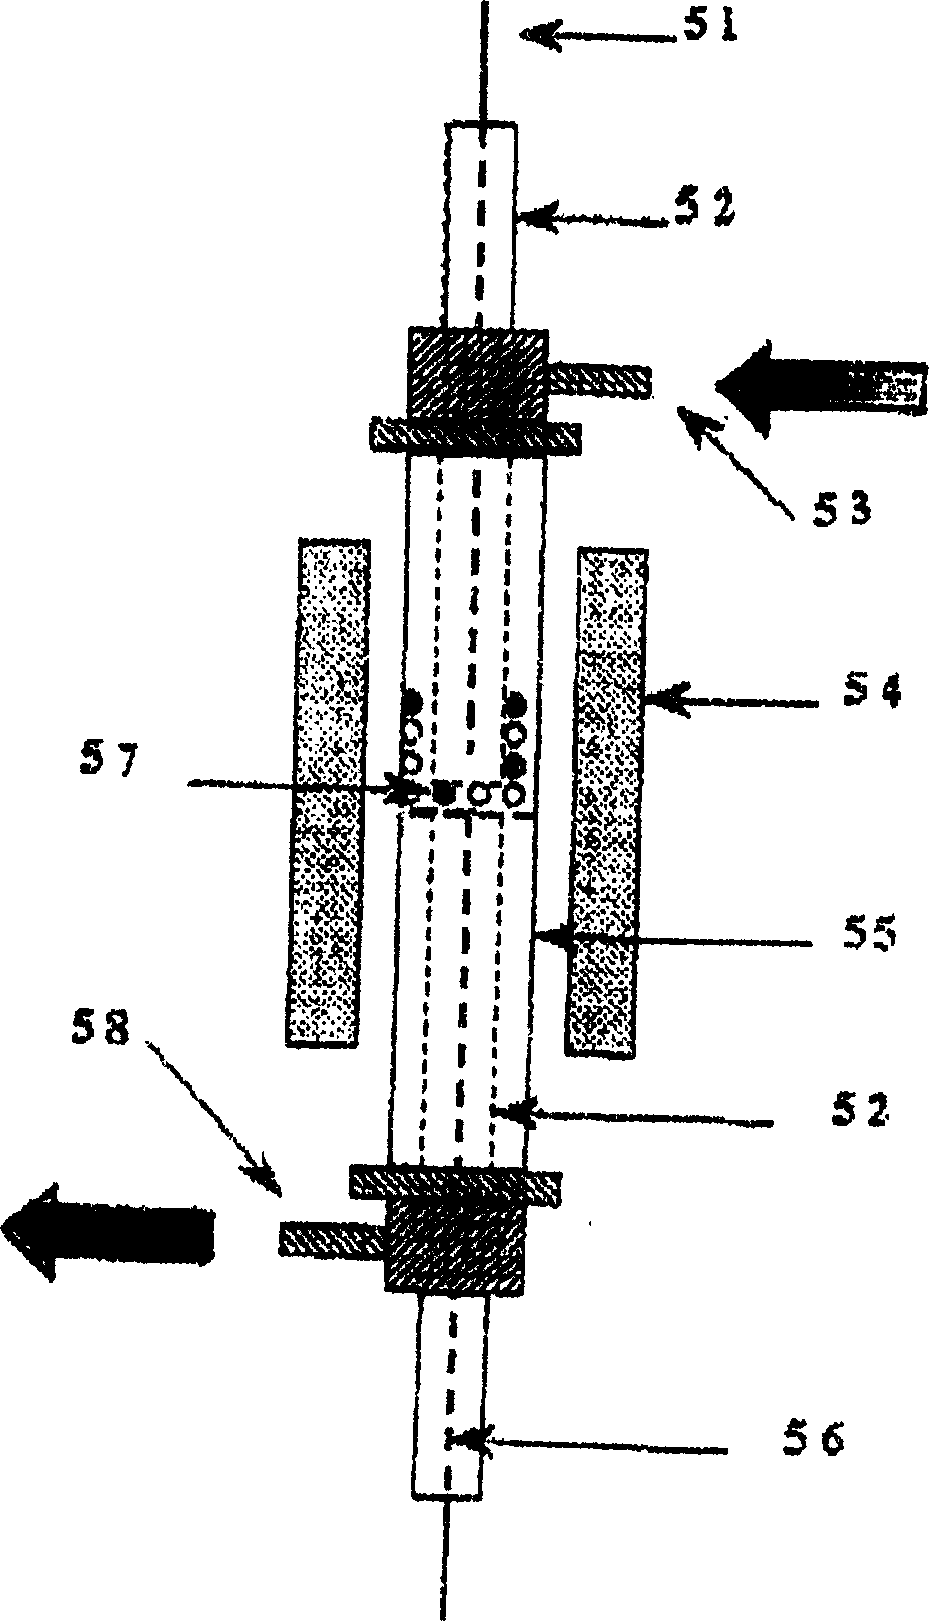 Process for preparing hydrogen by catalytic partial oxidation of liquid hydrocarbon